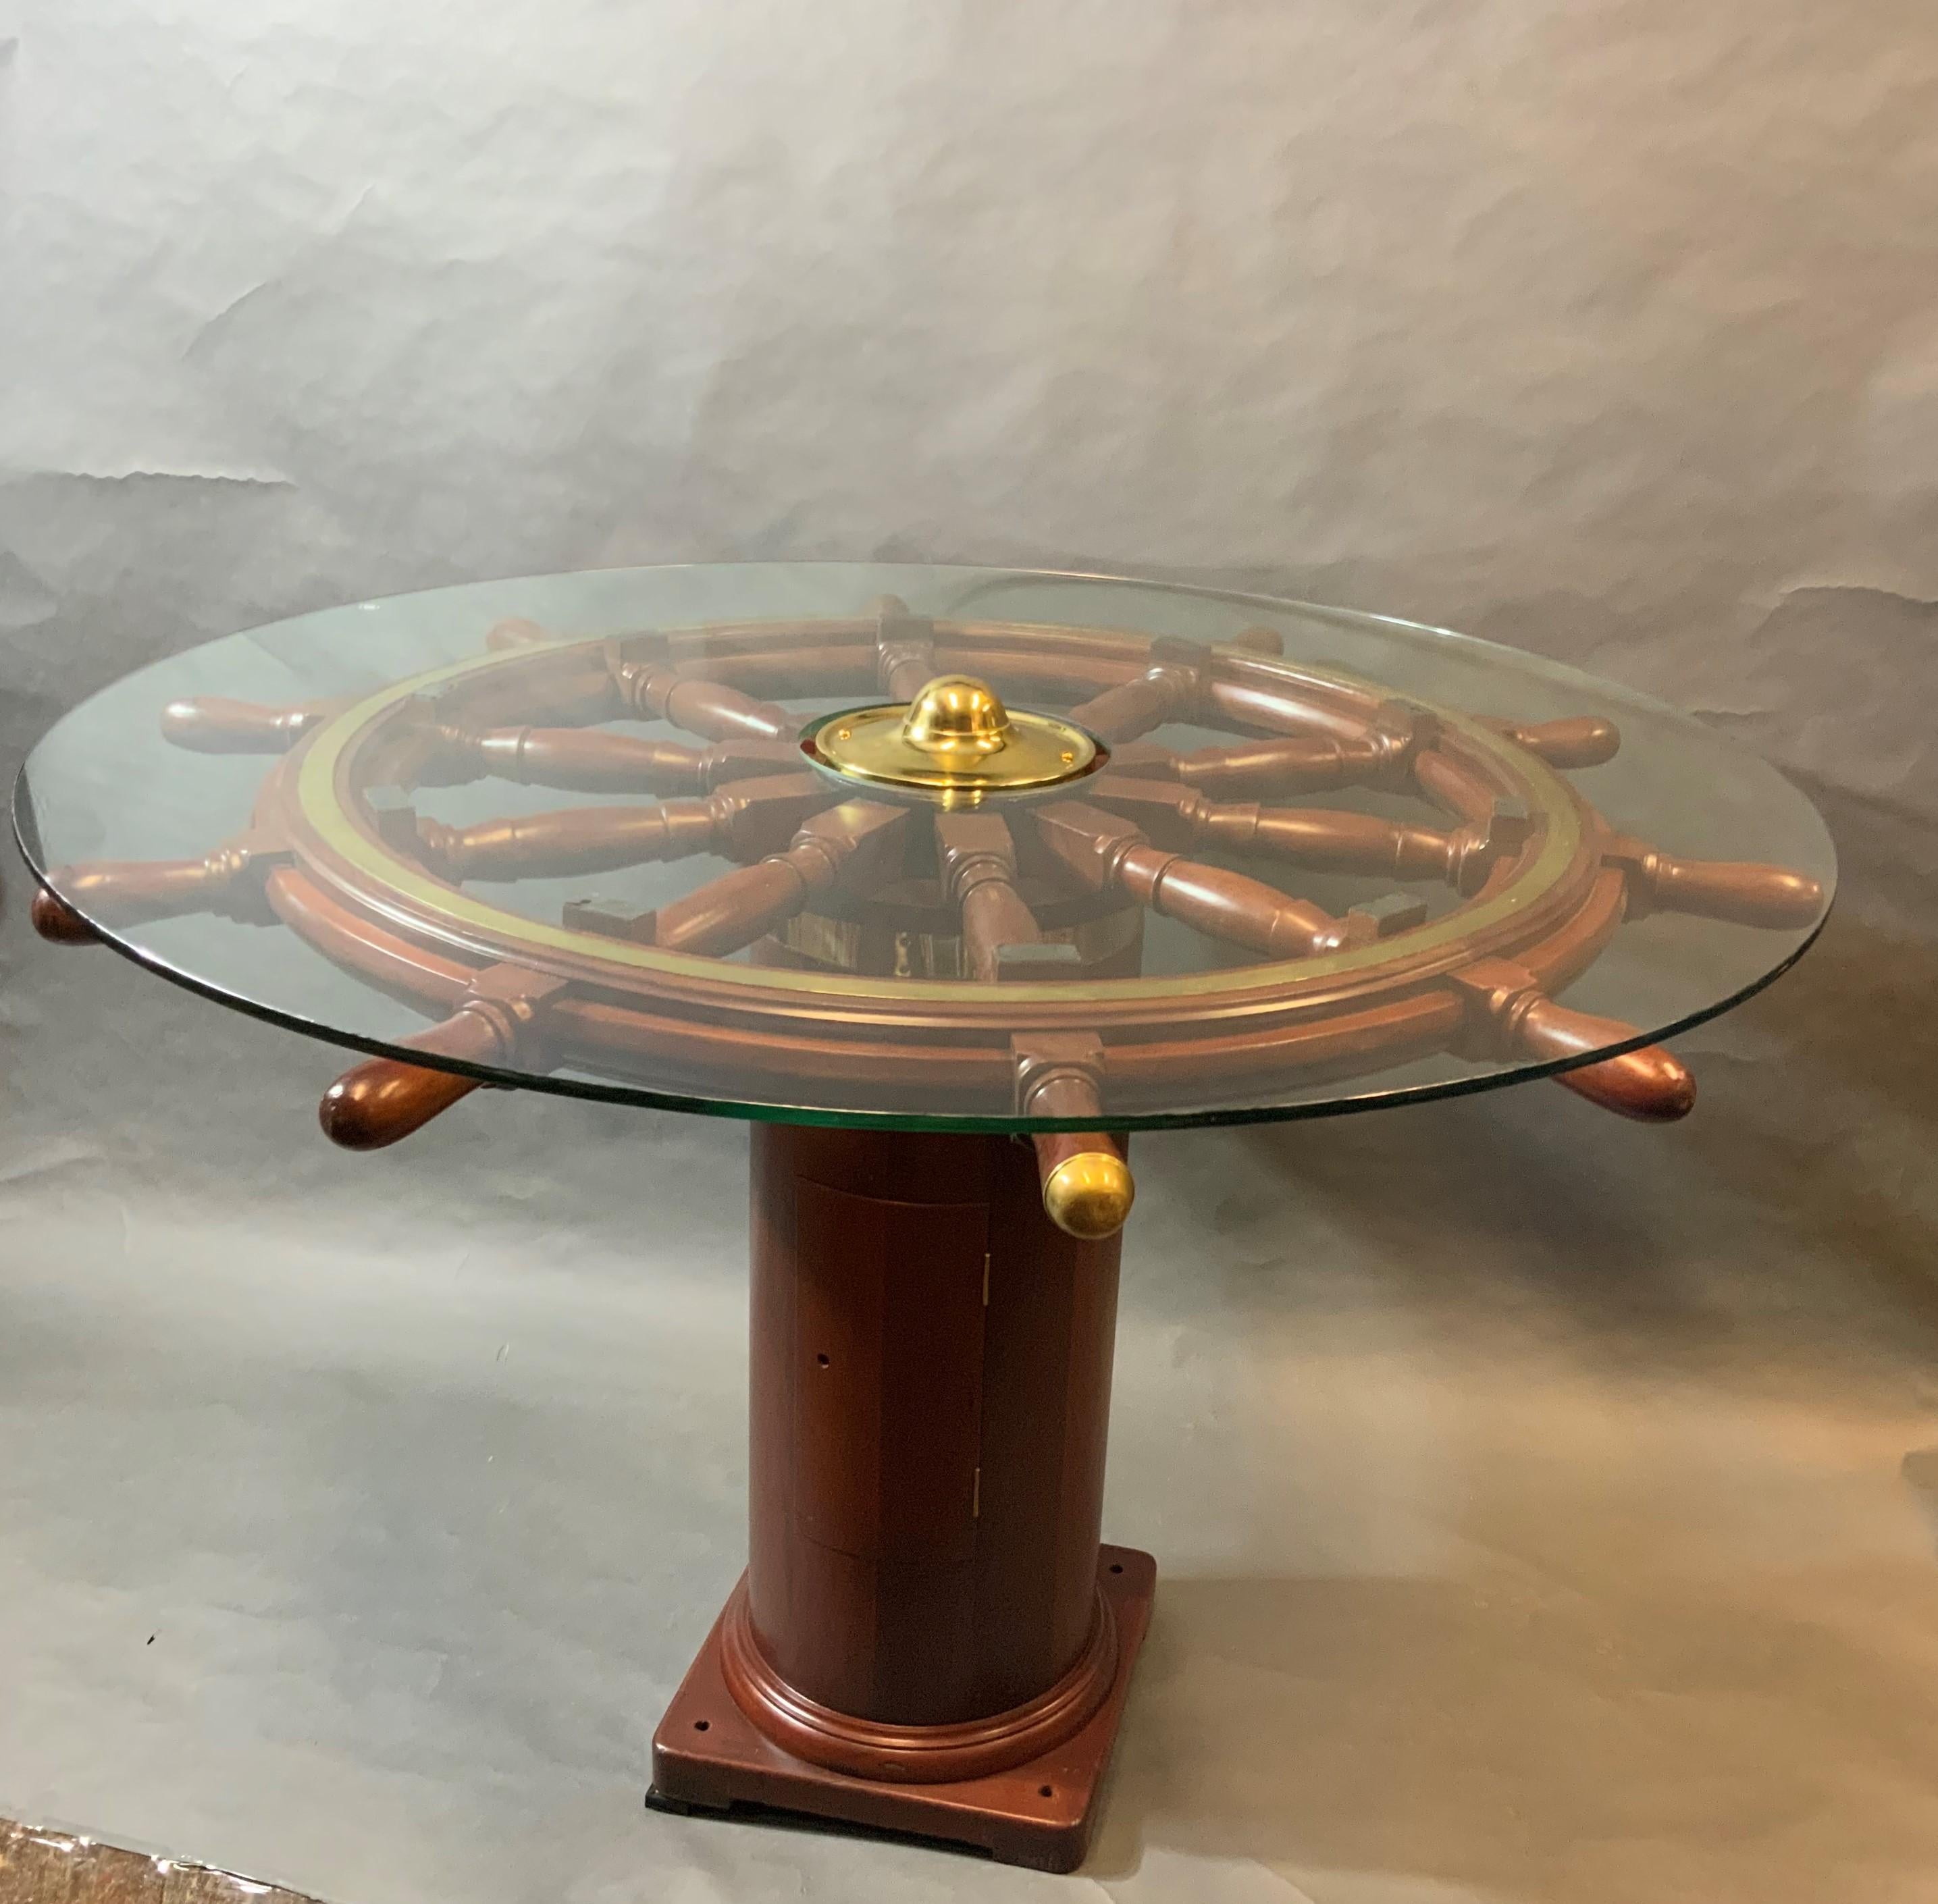 Varnished mahogany early twentieth century ships wheel that has been sanded, stained and refinished. With inlaid brass trim ring and hub. Mounted onto a ship's binnacle base that has also been wonderfully restored as well. With tempered glass